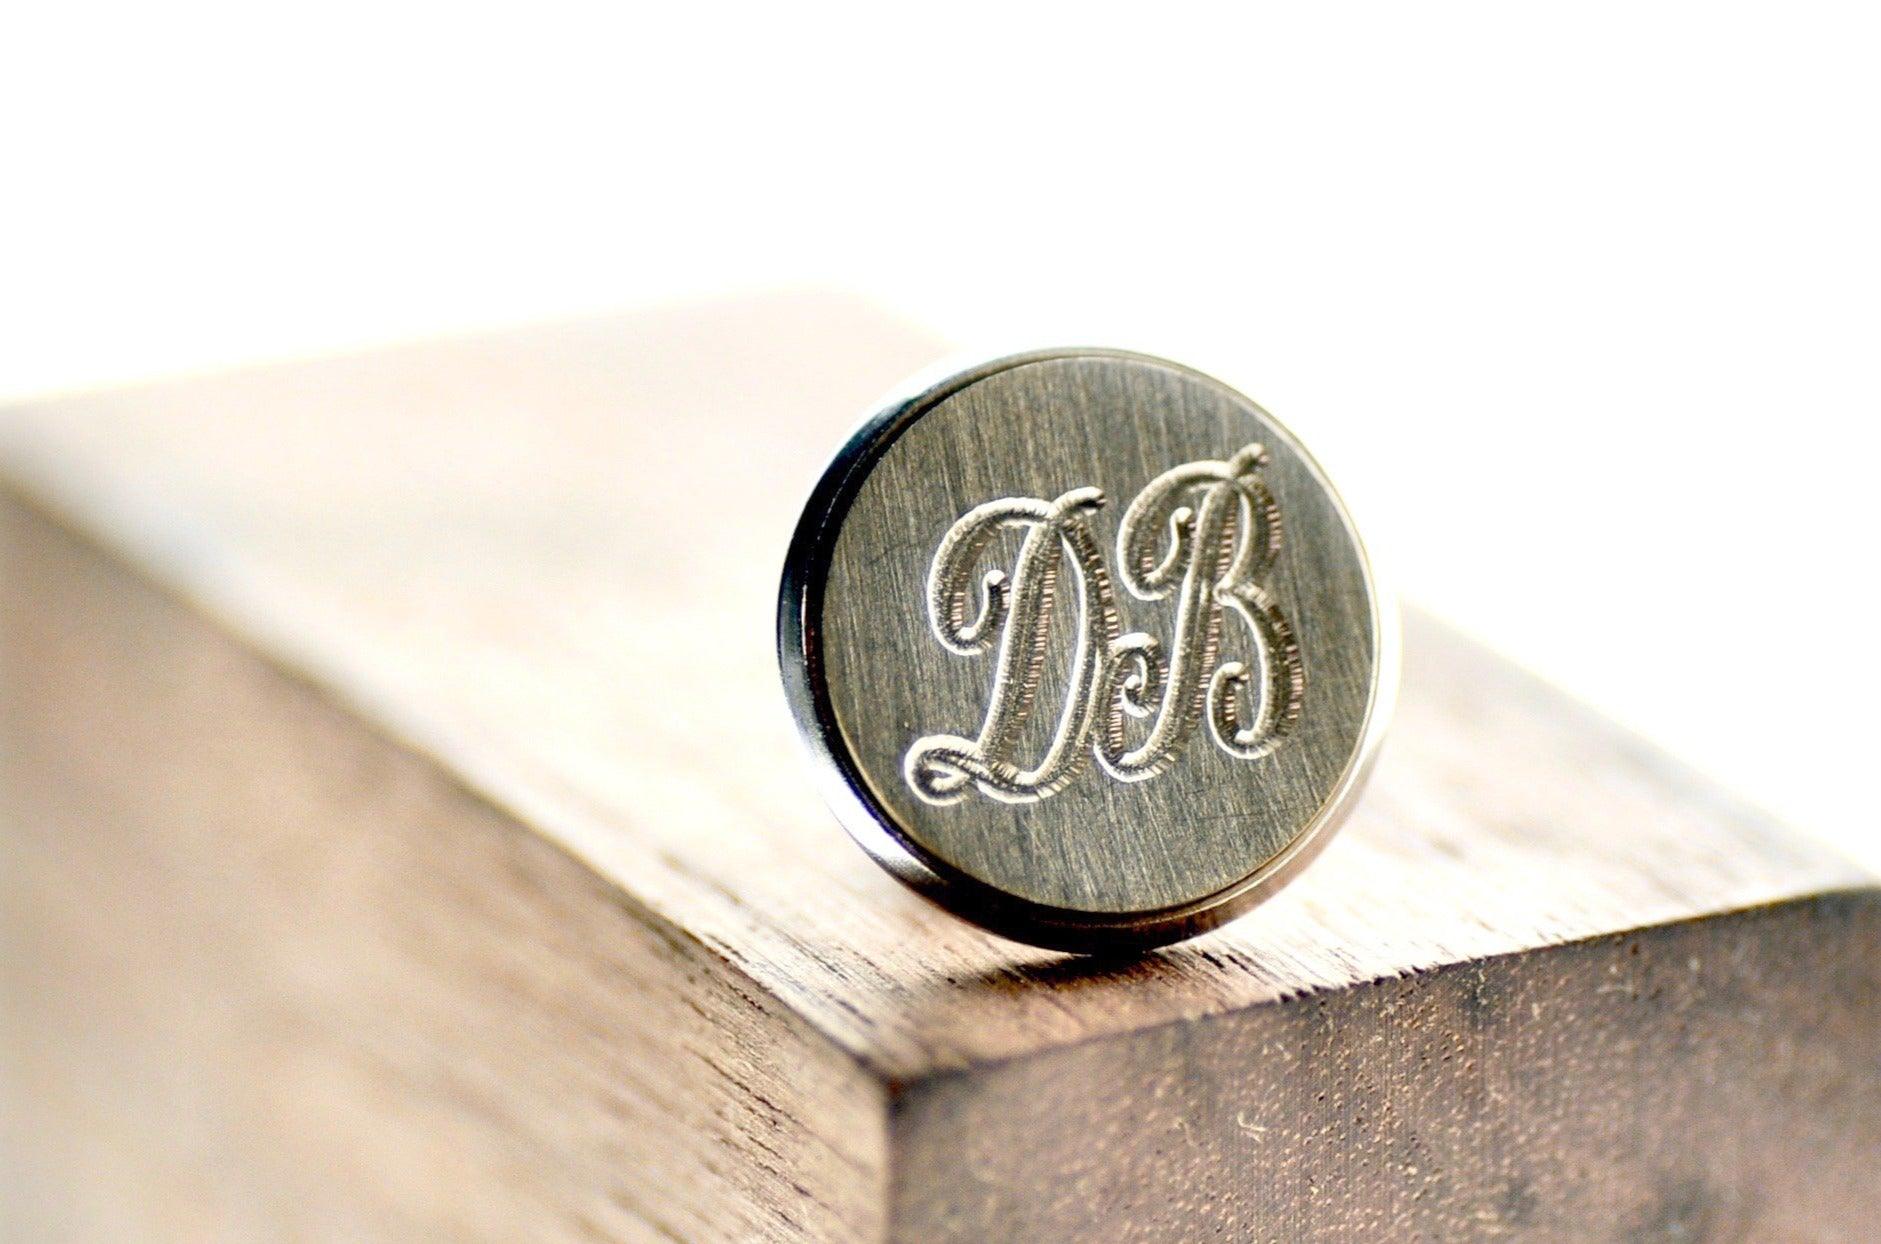 Double Line Initials Signet Pin - Backtozero B20 - 10mm, 12mm, 14mm, 2 initials, 2initials, badge, brass, brooch, Custom, double, Double Initials, him, initial, monogram, Personalized, pin, signet, stainless steel, Two initials, Wedding